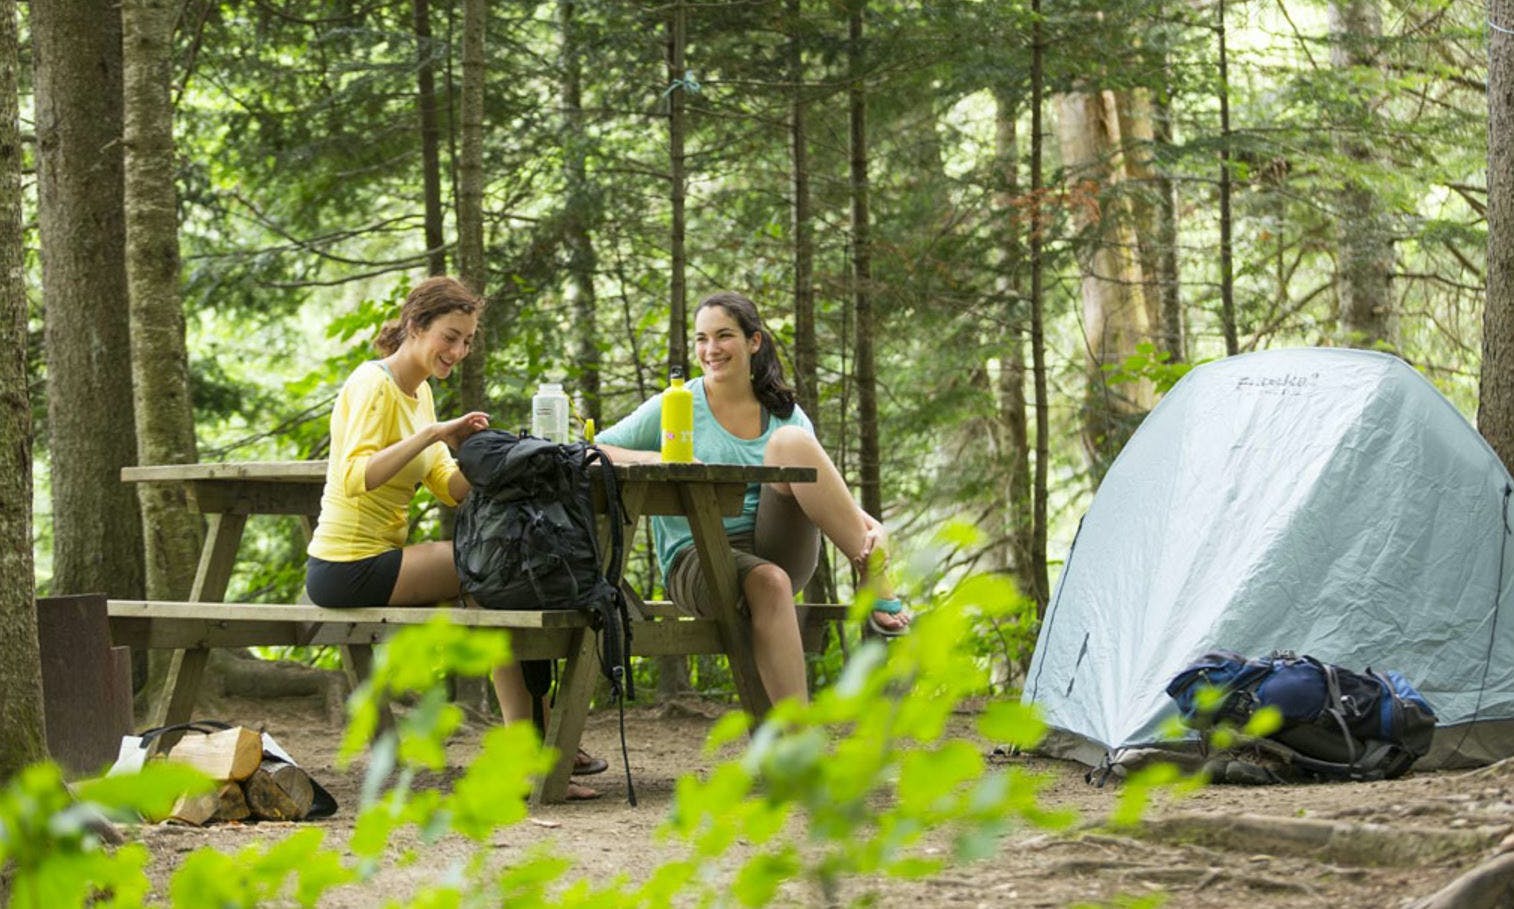 Camping at Hautes-Gorges park in Quebec